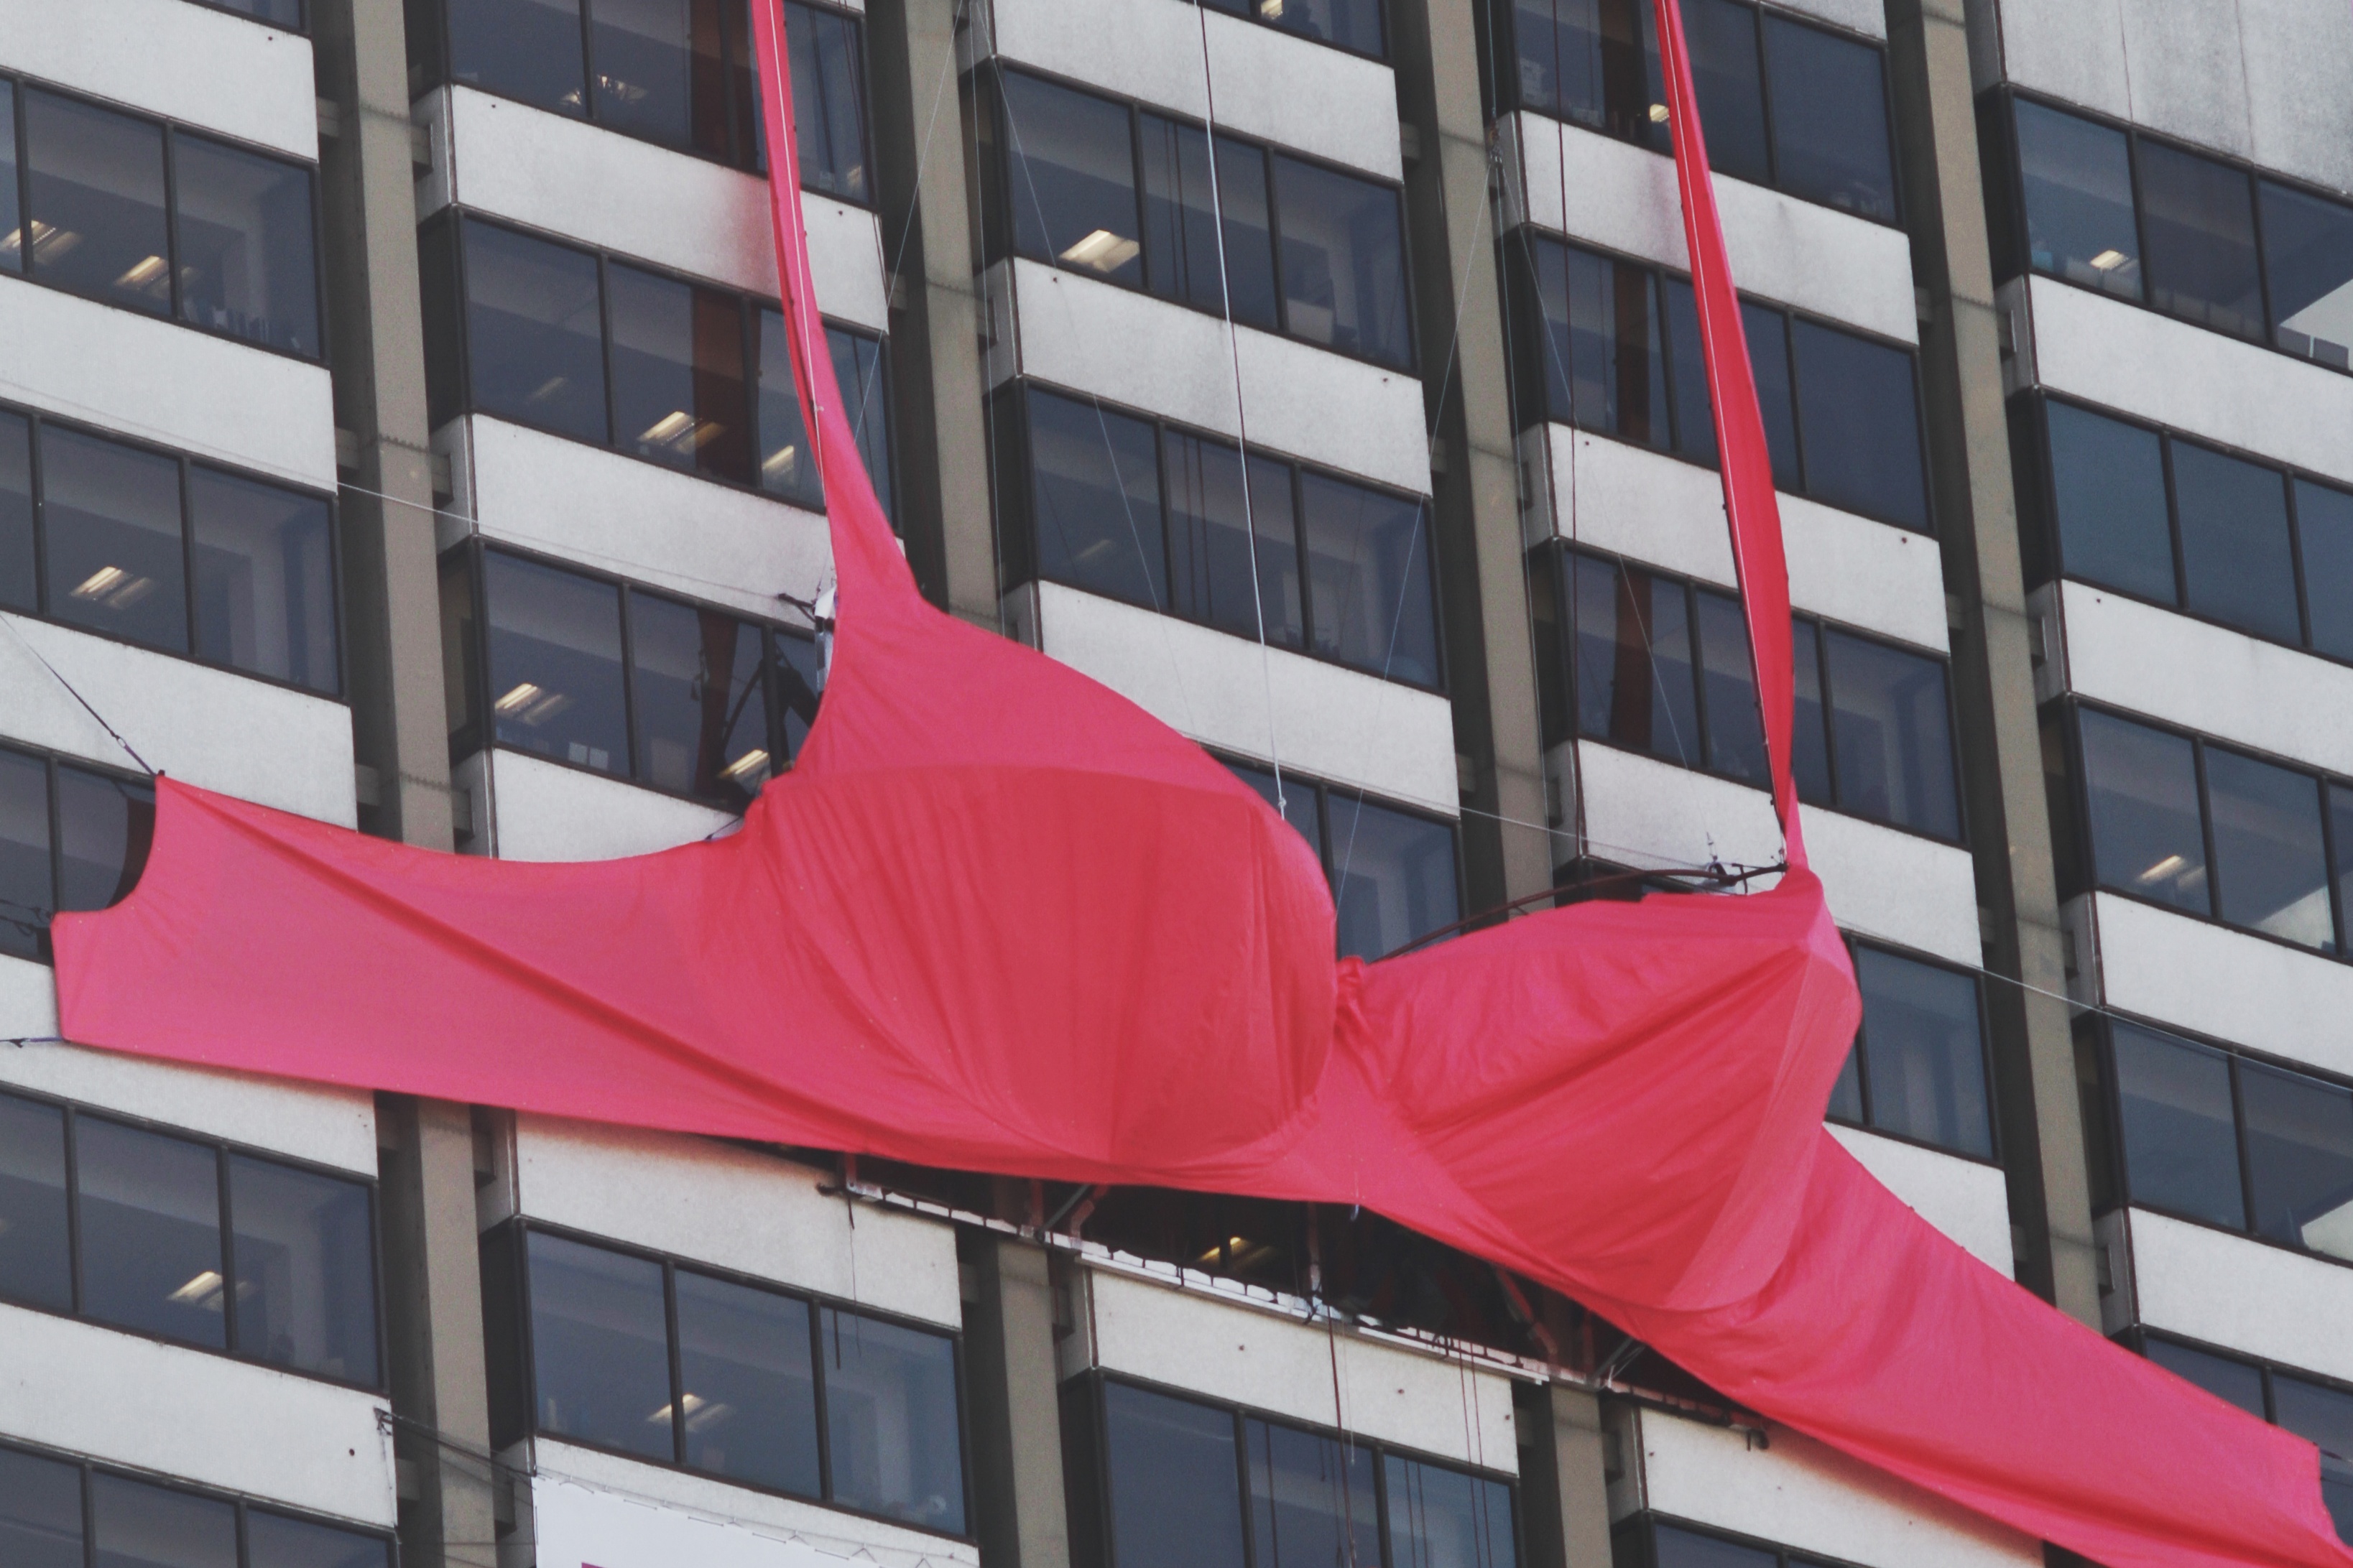 File:ITV London Studios Displaying the Guinness World Records Worlds  Largest Bra Oct 22nd 2011.jpg - Wikimedia Commons